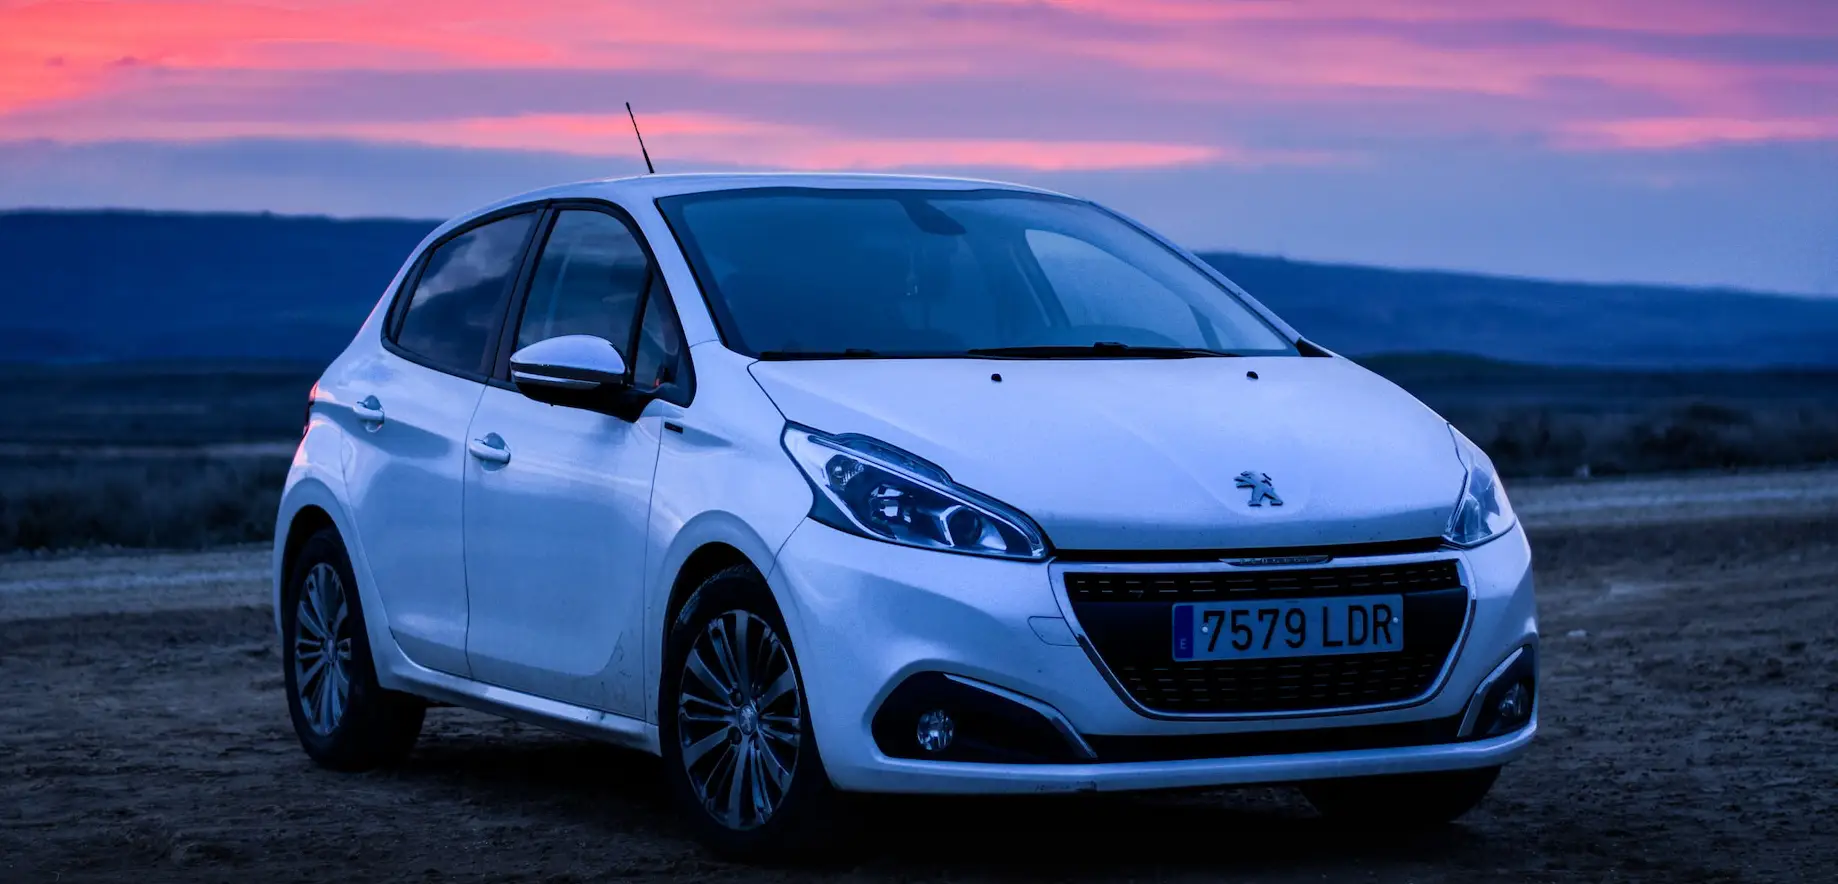 white peugeot car parked in front of a pink sunset